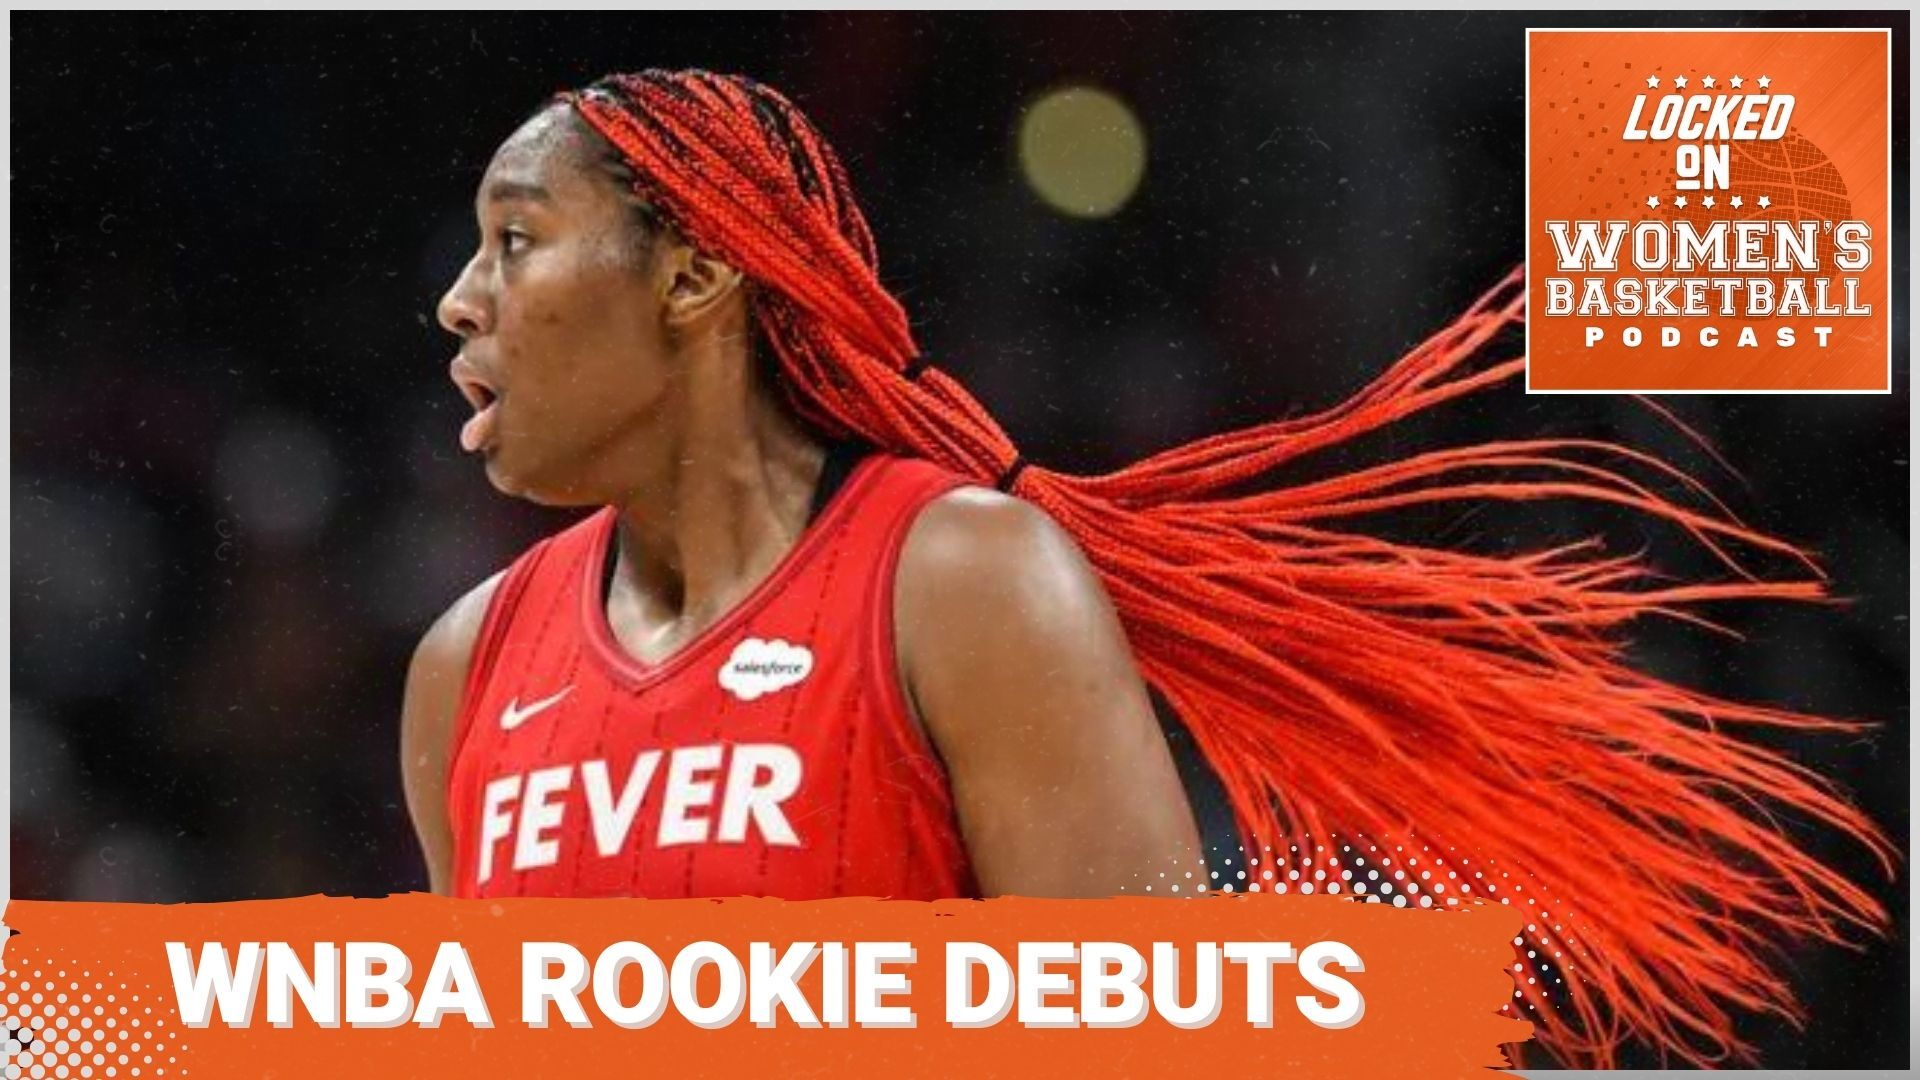 Locked on WBB Top WNBA rookies make their debuts The Next